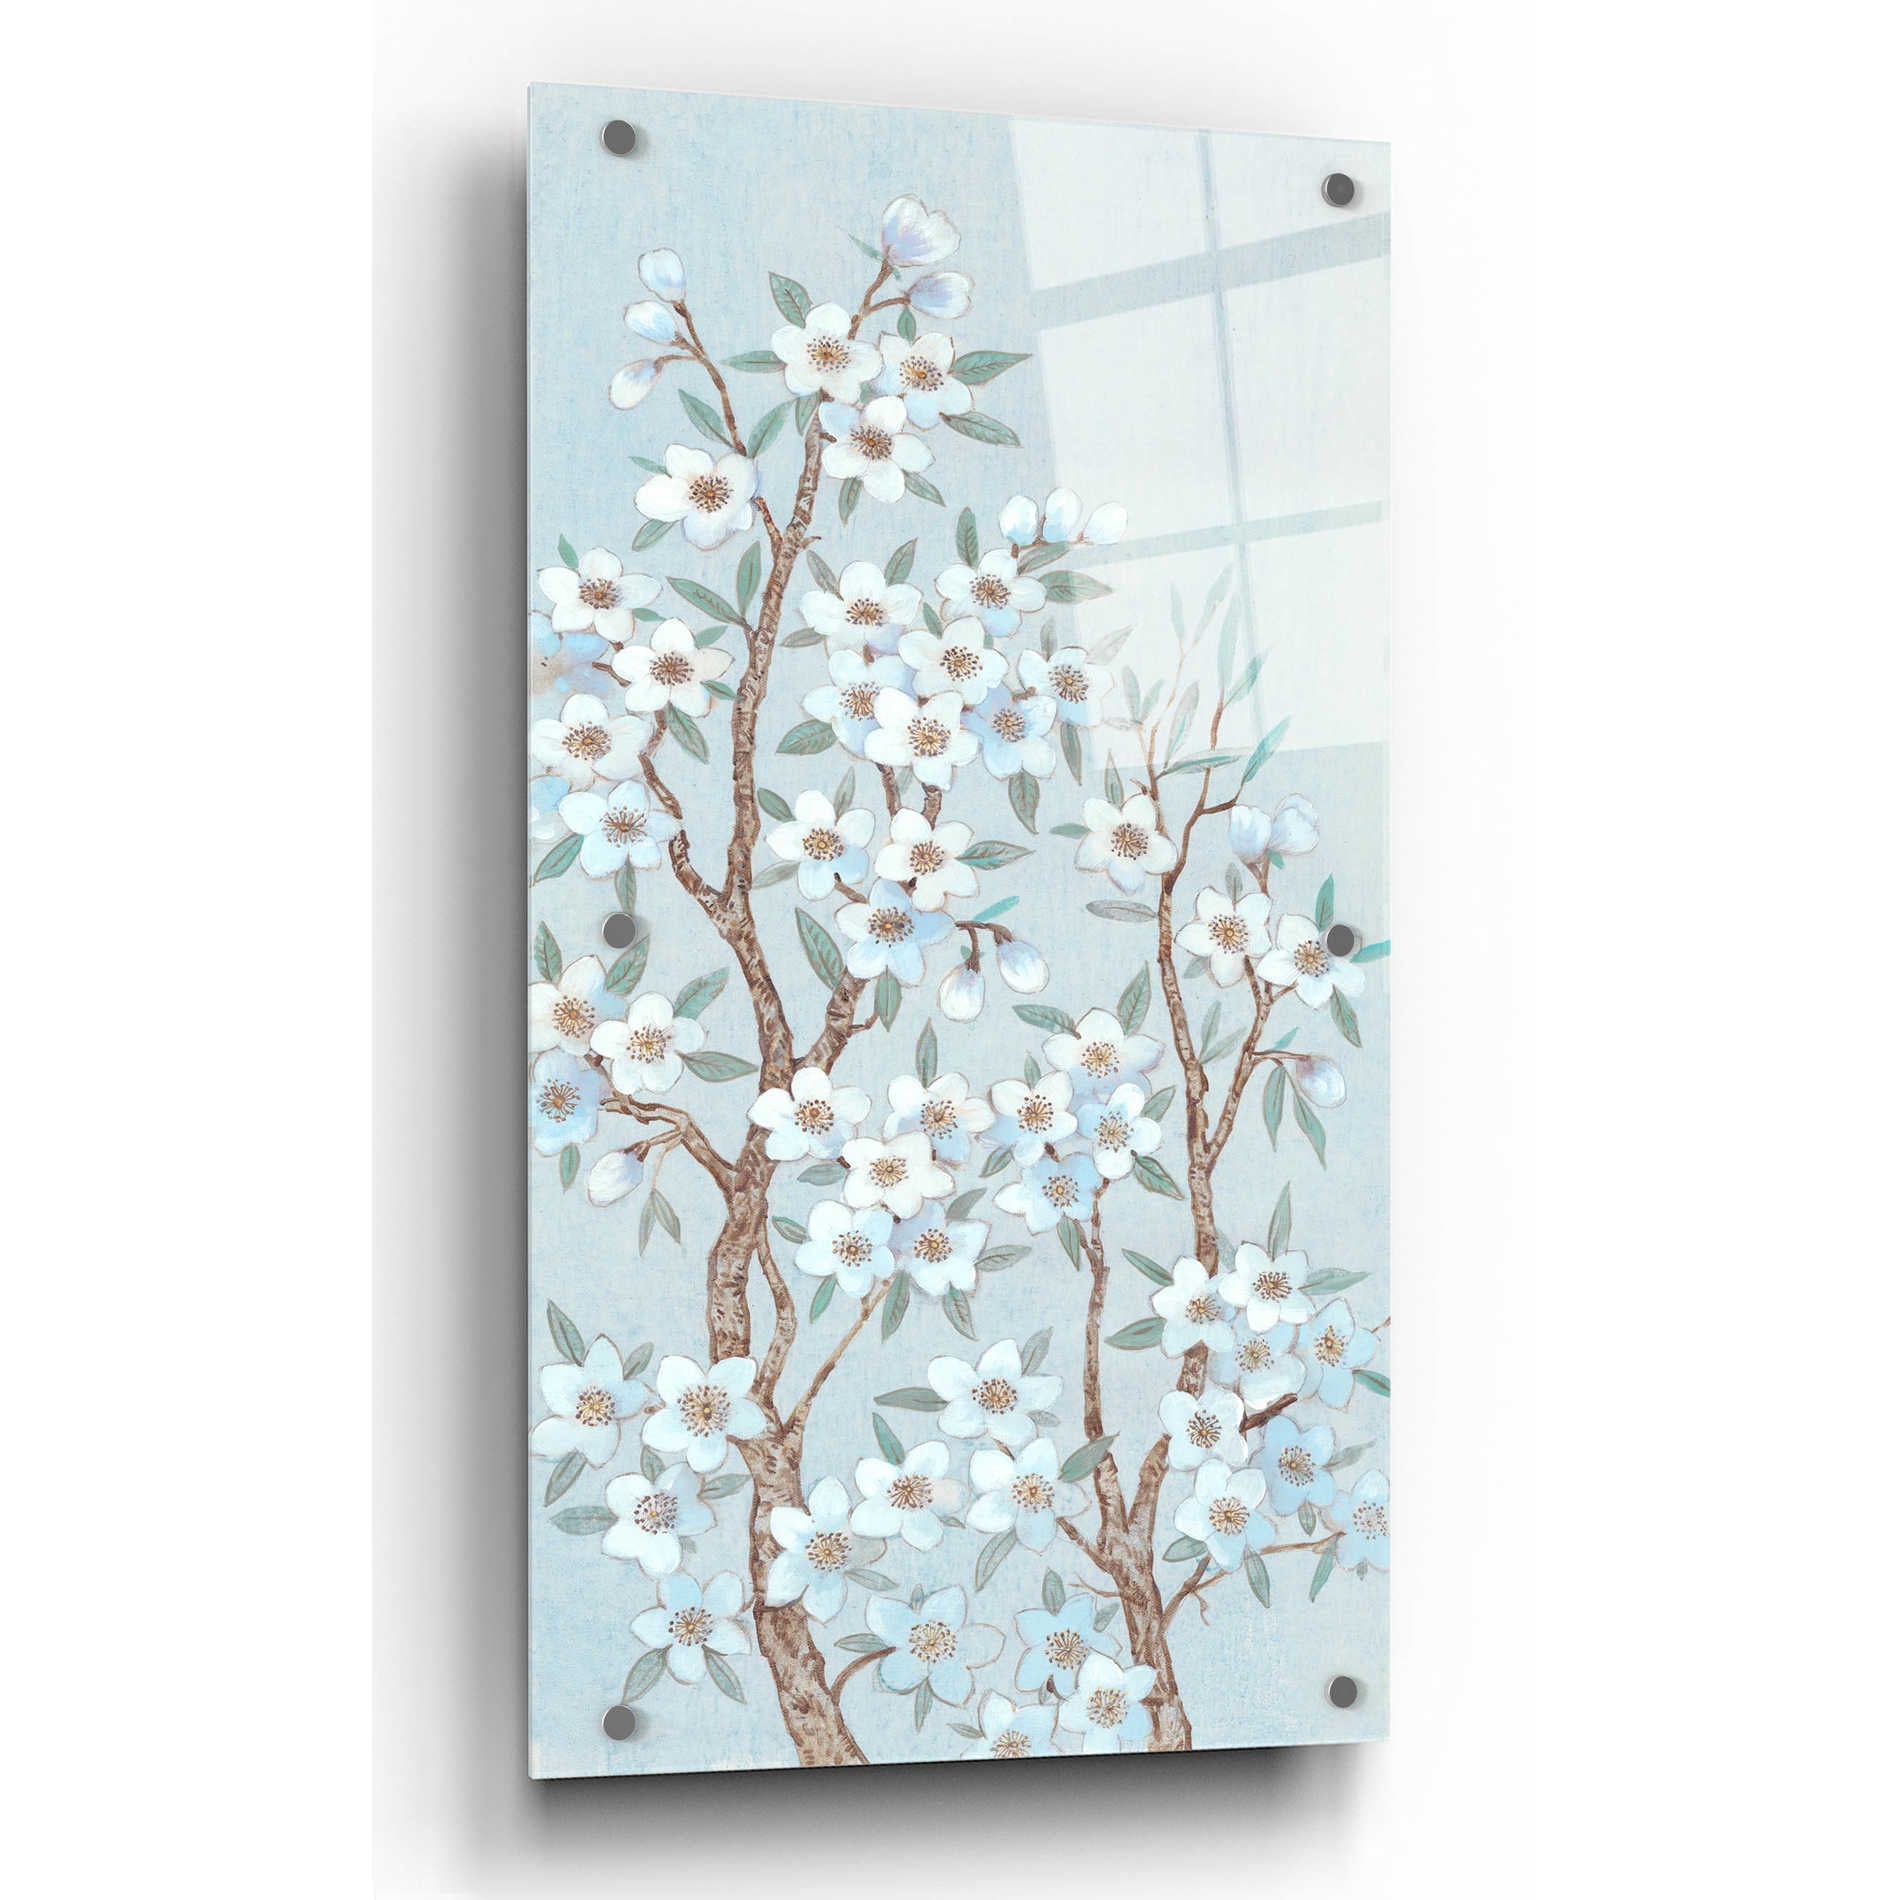 Epic Art 'Branches of Blossoms II' by Tim O'Toole, Acrylic Glass Wall Art,2:1